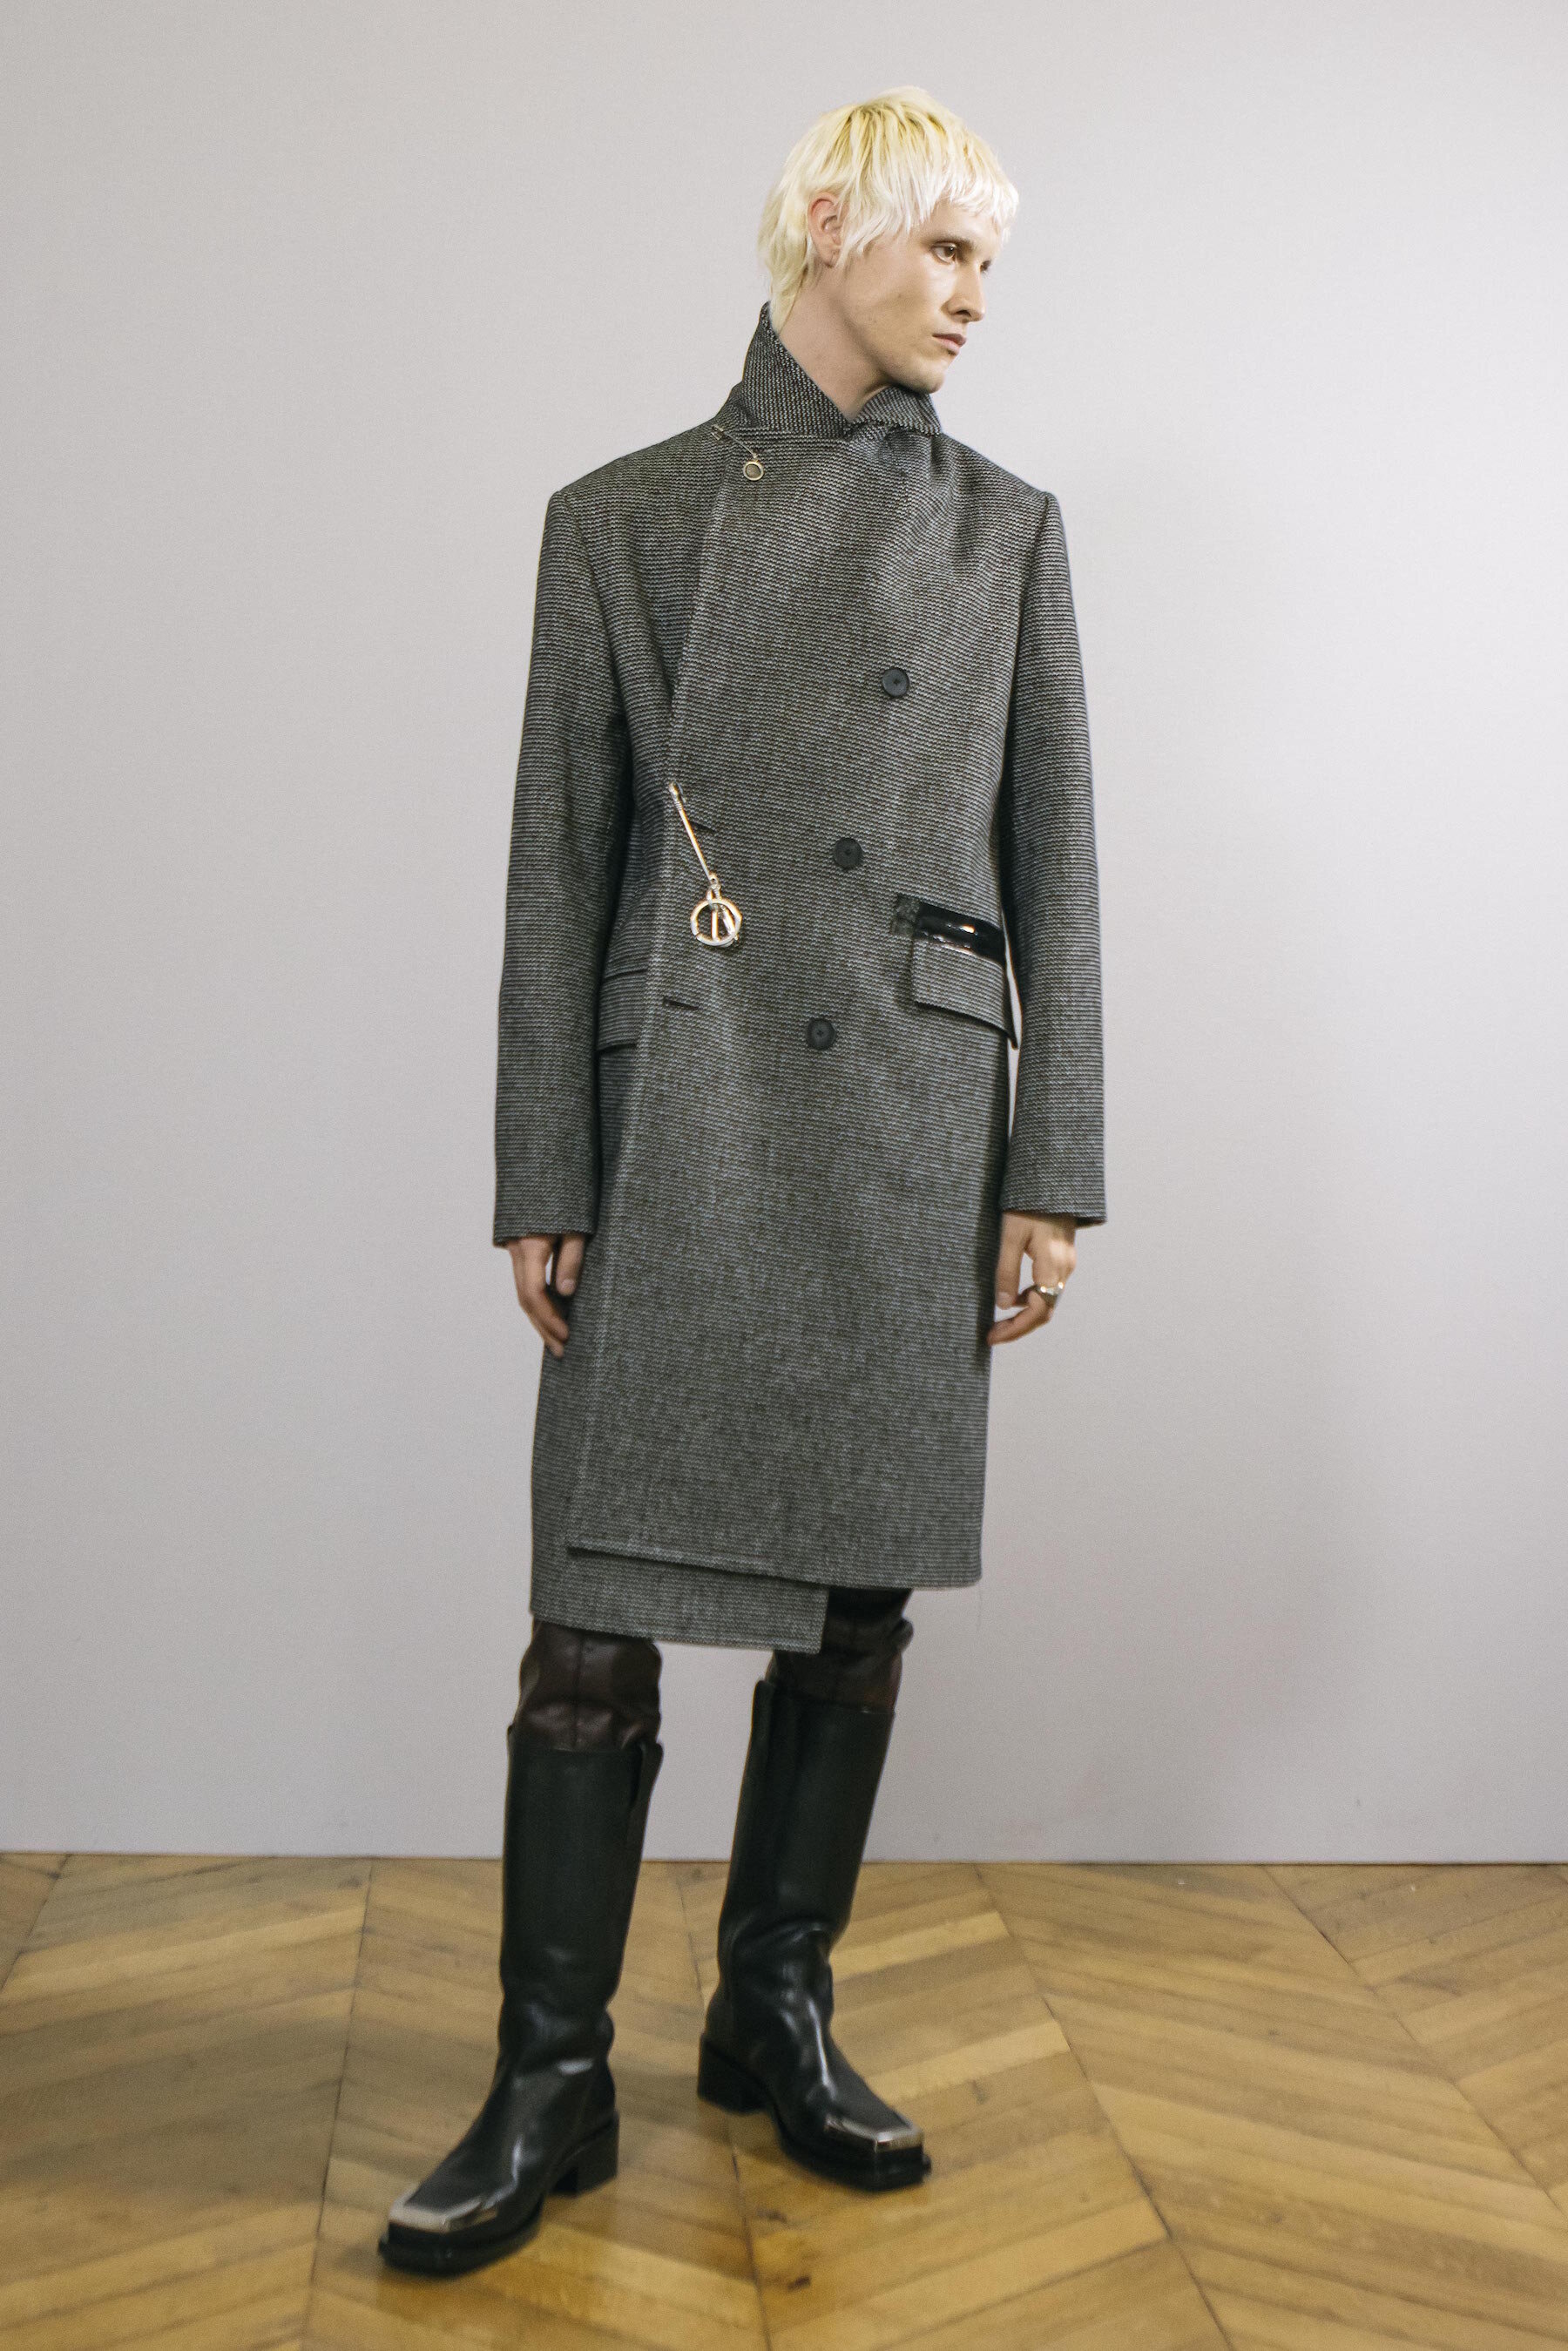 Givenchy Fall Winter 2020 Men_s RTW Collection_1st Look (11).jpg